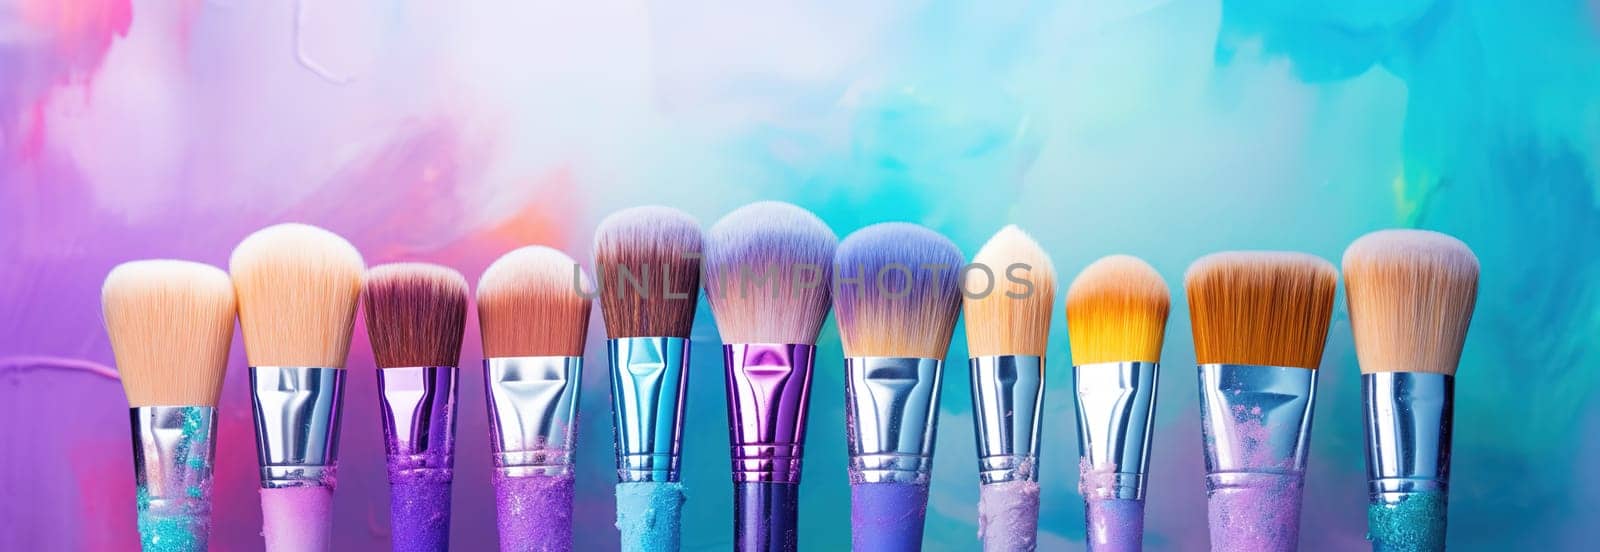 row of brushes laid out flat on a canvas, various shades of purple and blue against a colorful background by KaterinaDalemans